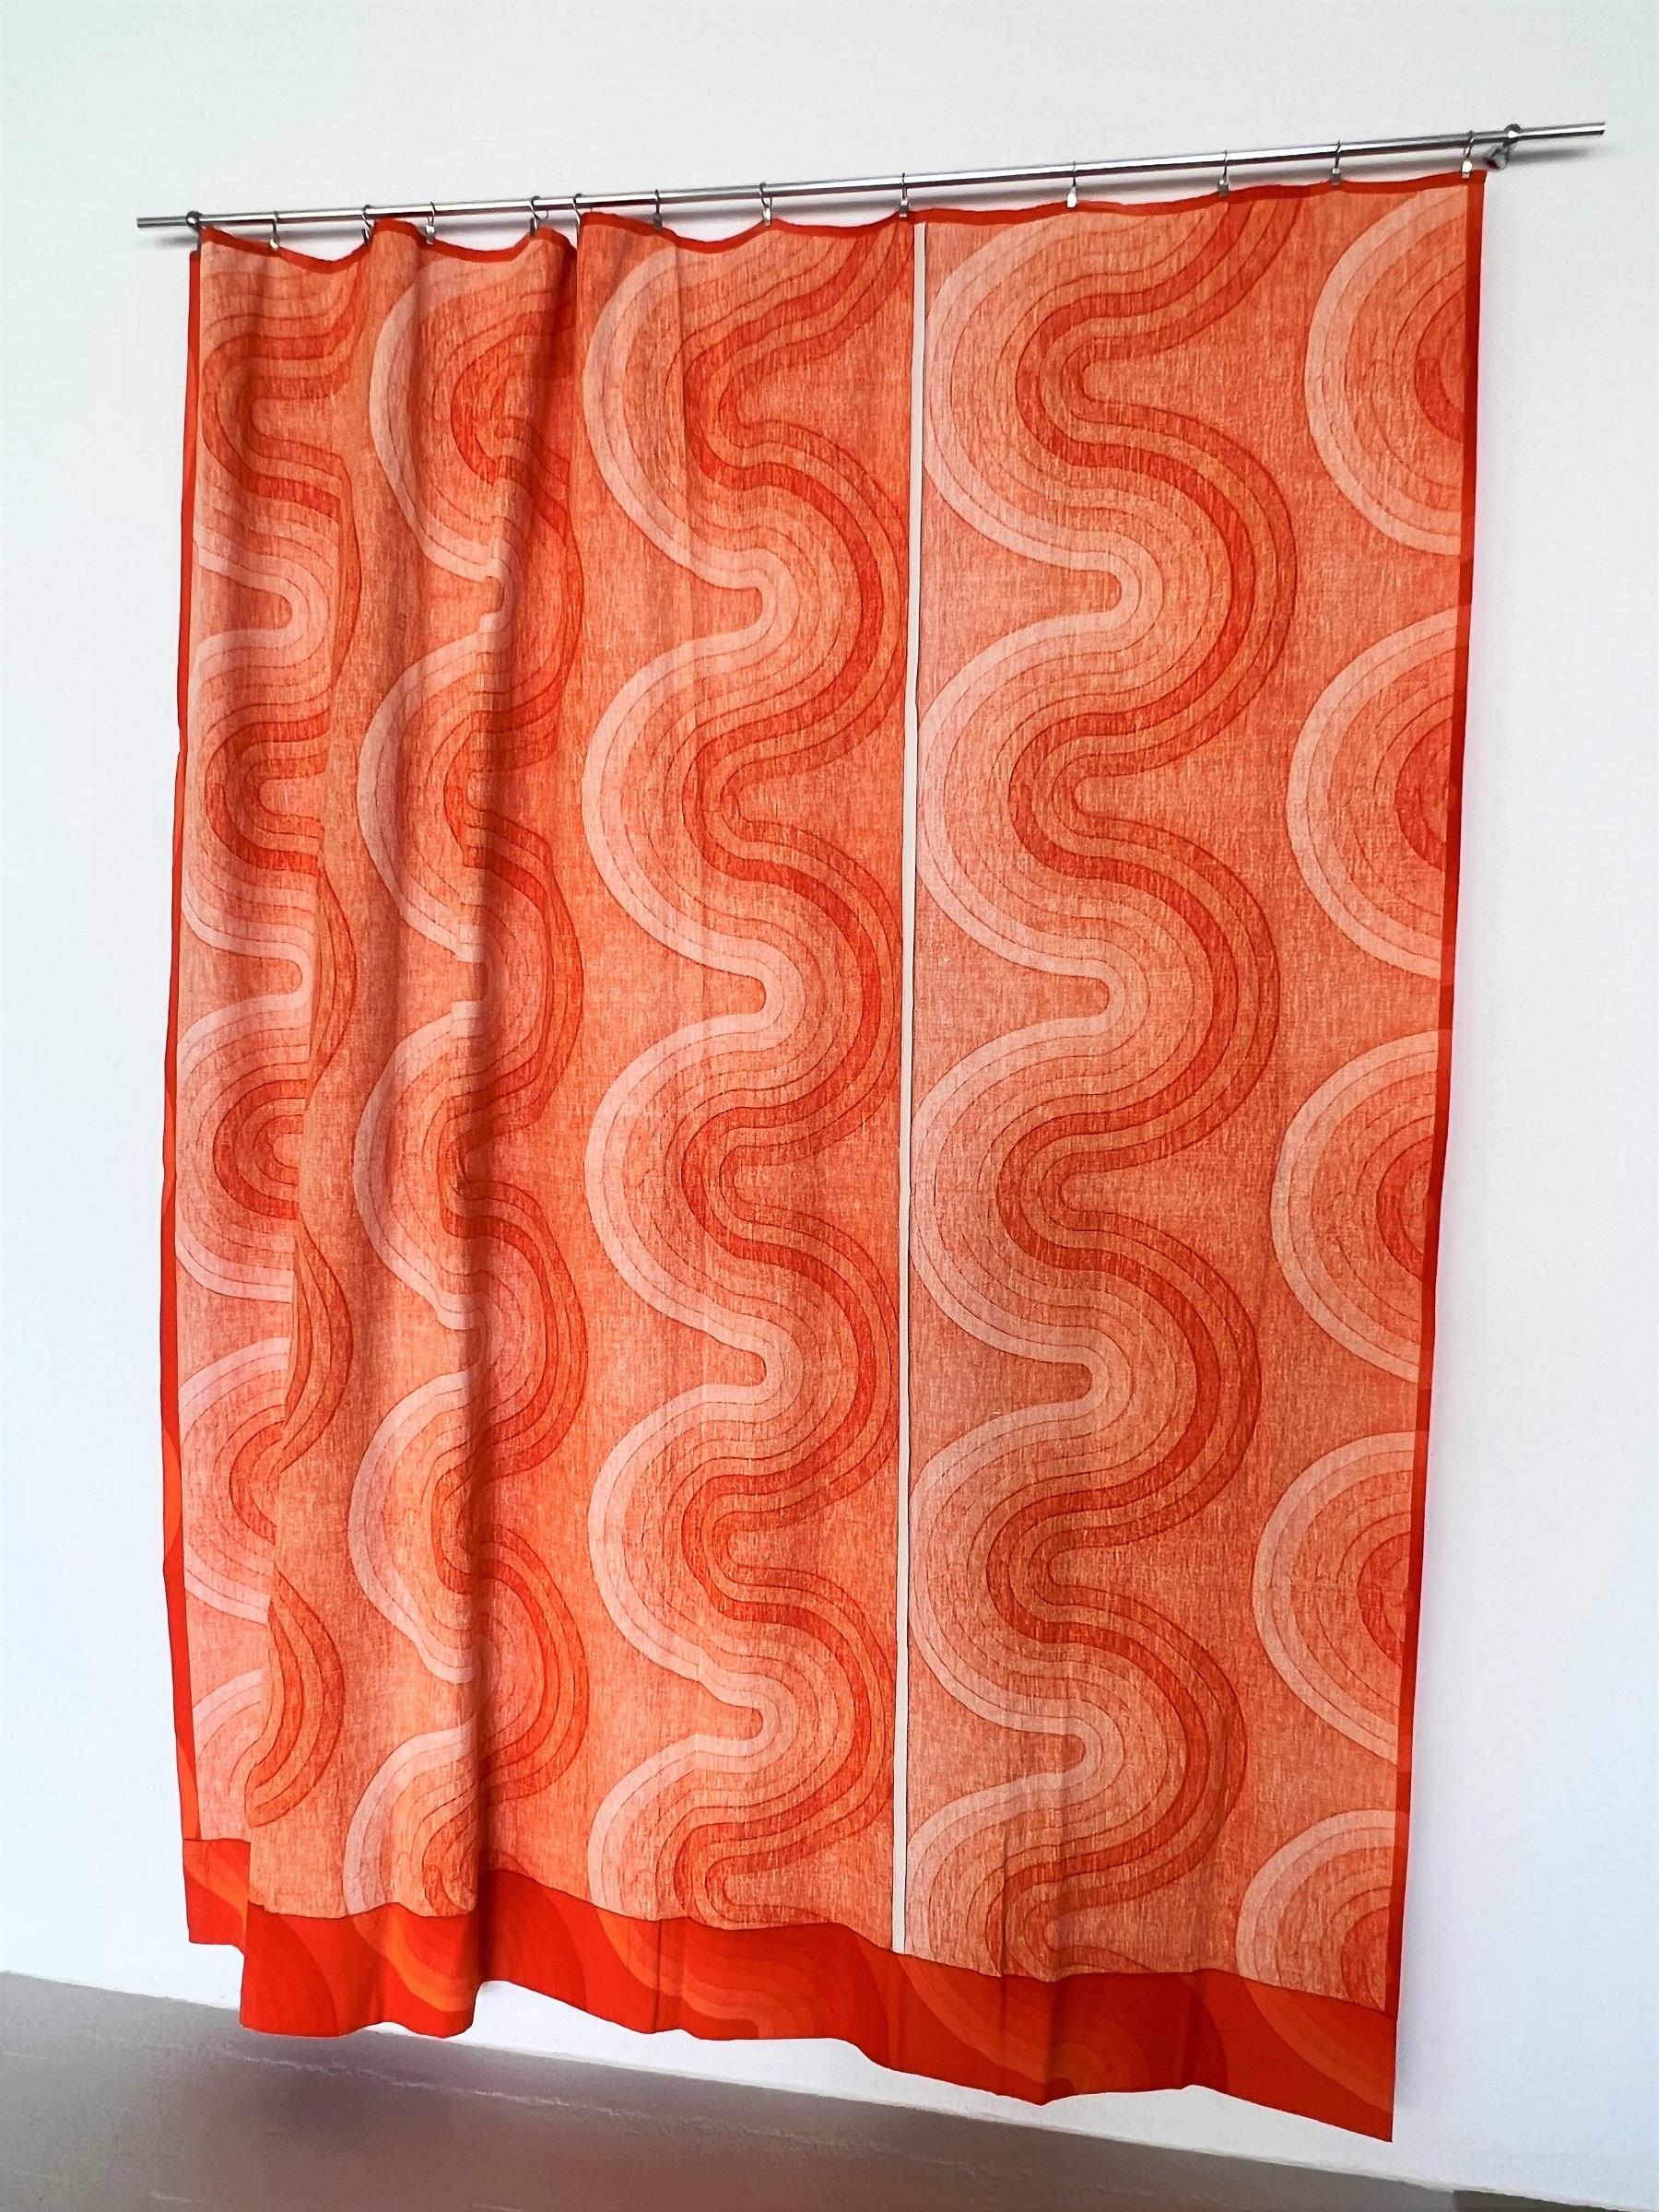 20th Century Verner Panton Original Fabric Panel Tapestry for Mira-X Collection, 1970s For Sale